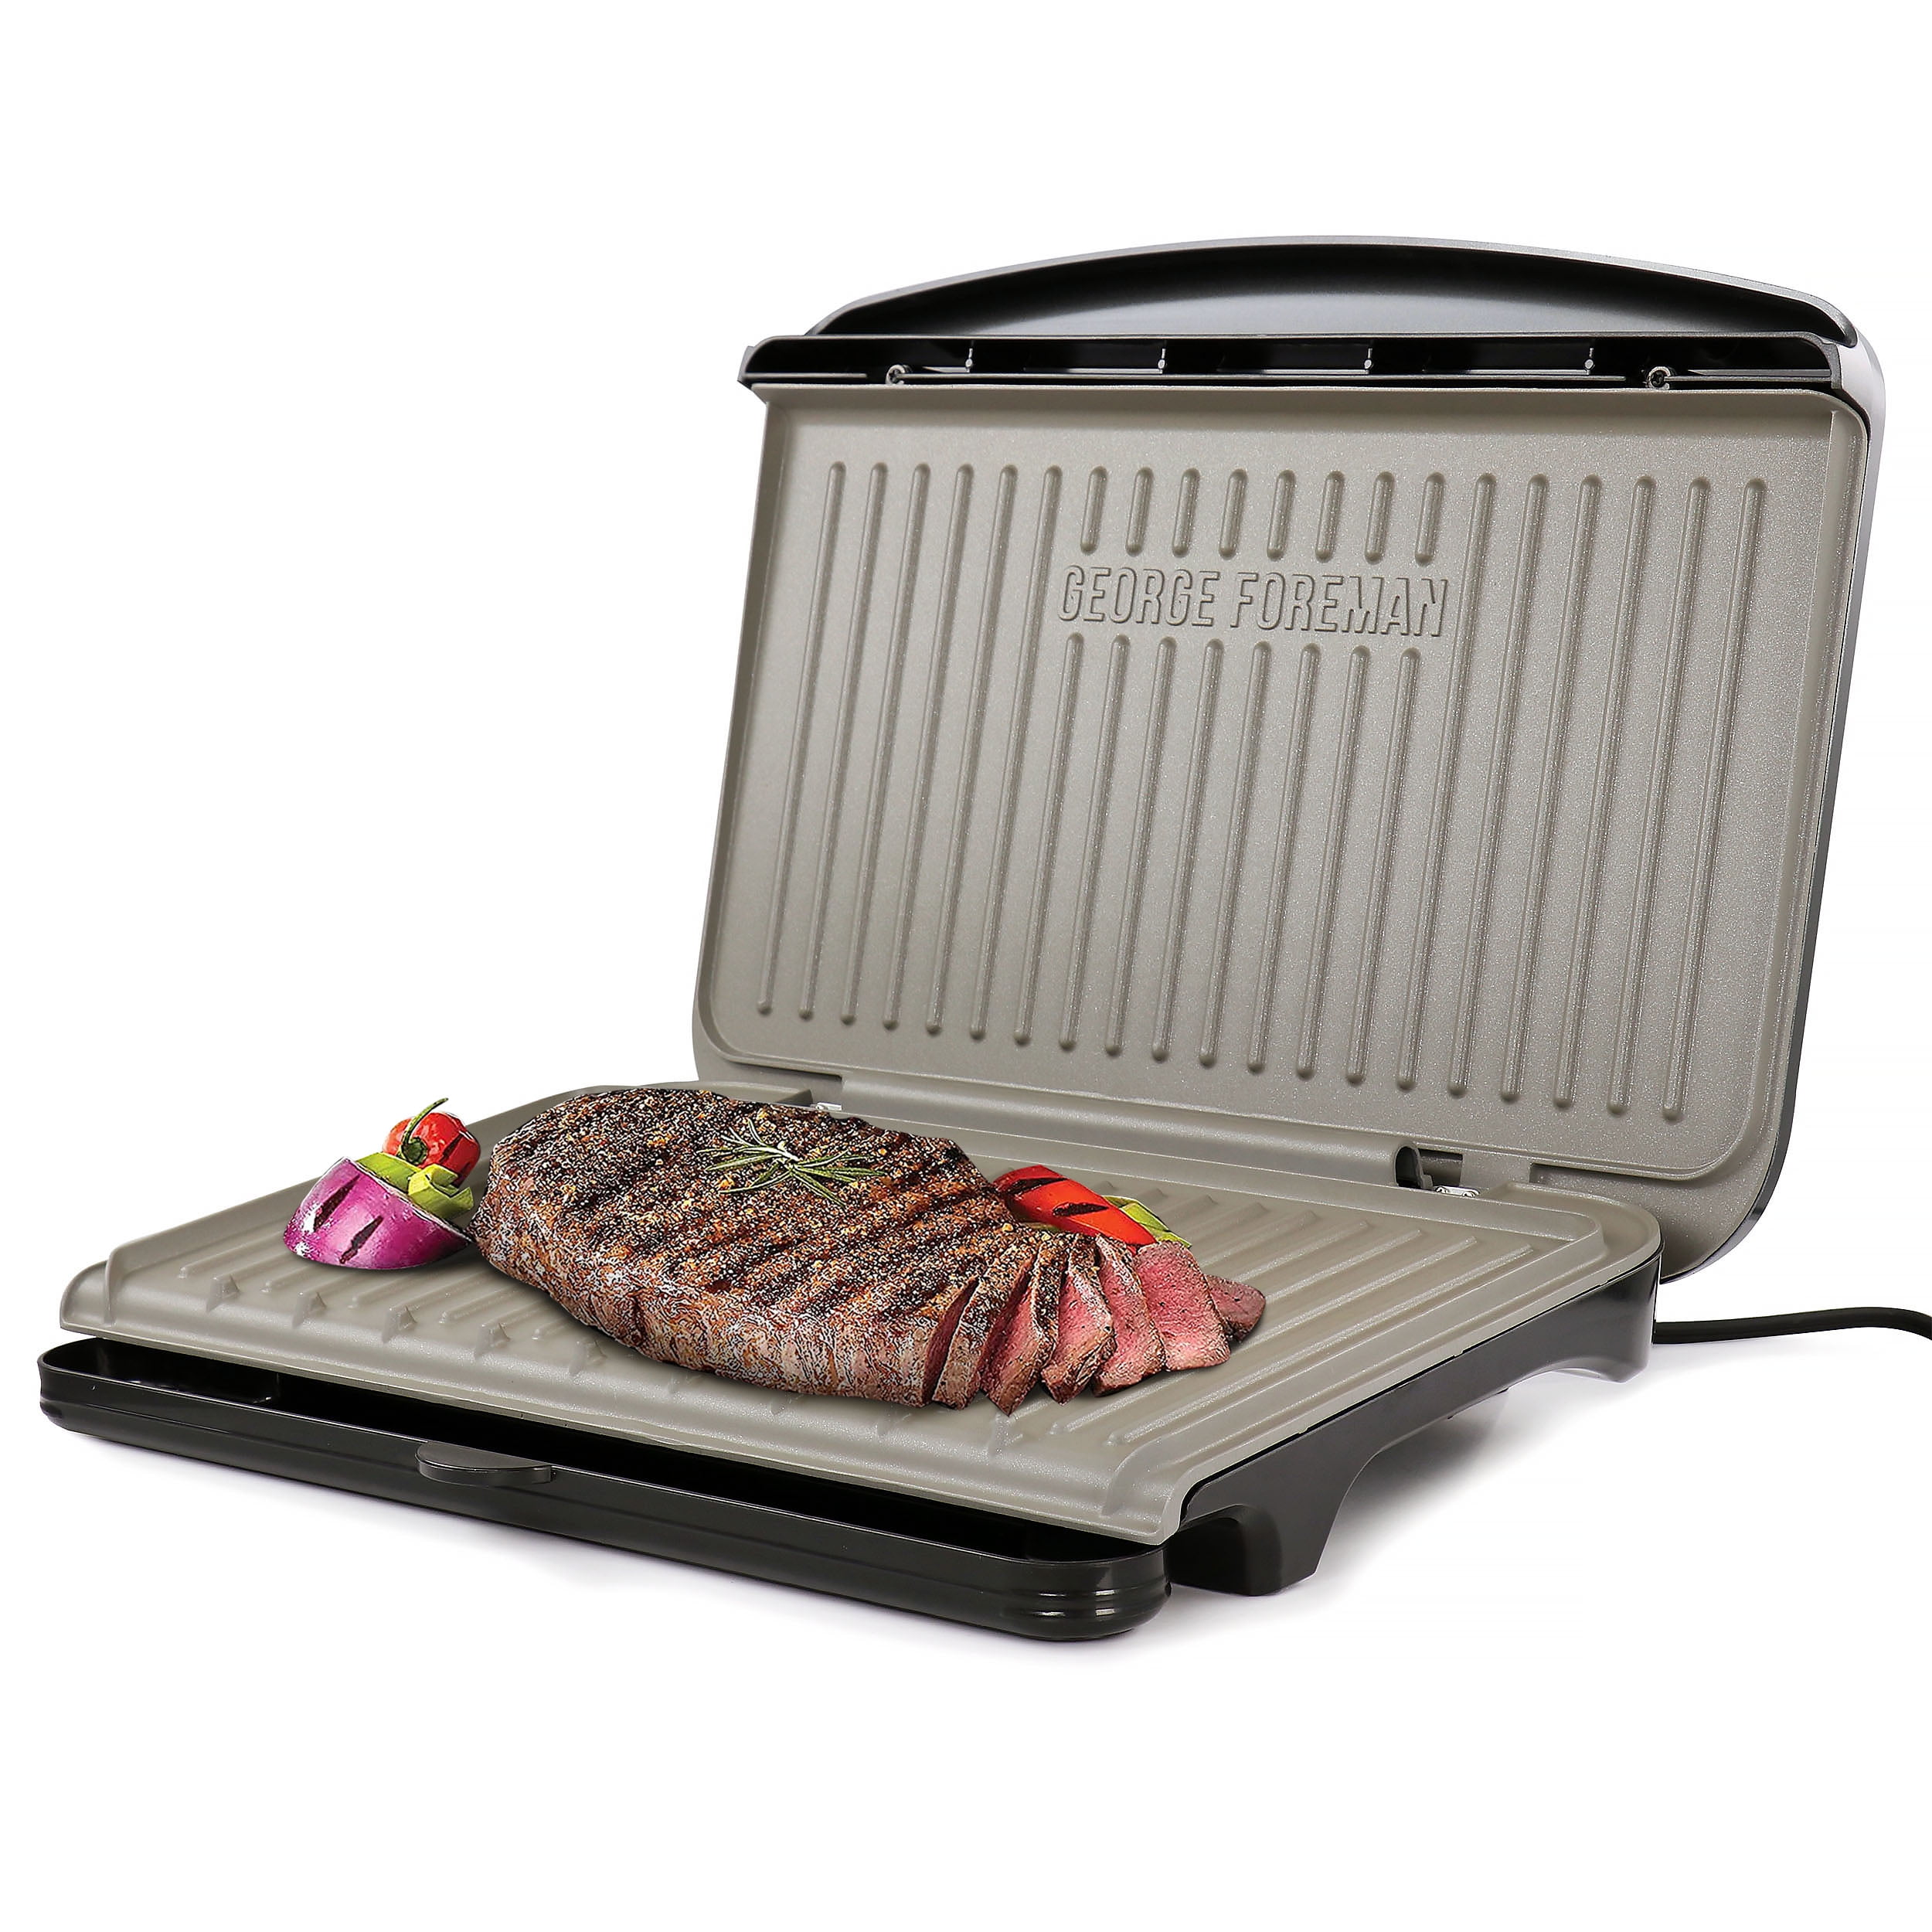  George Foreman 9-Serving Classic Plate Electric Grill and  Panini Press, Silver, GR144: Electric Contact Grills: Home & Kitchen